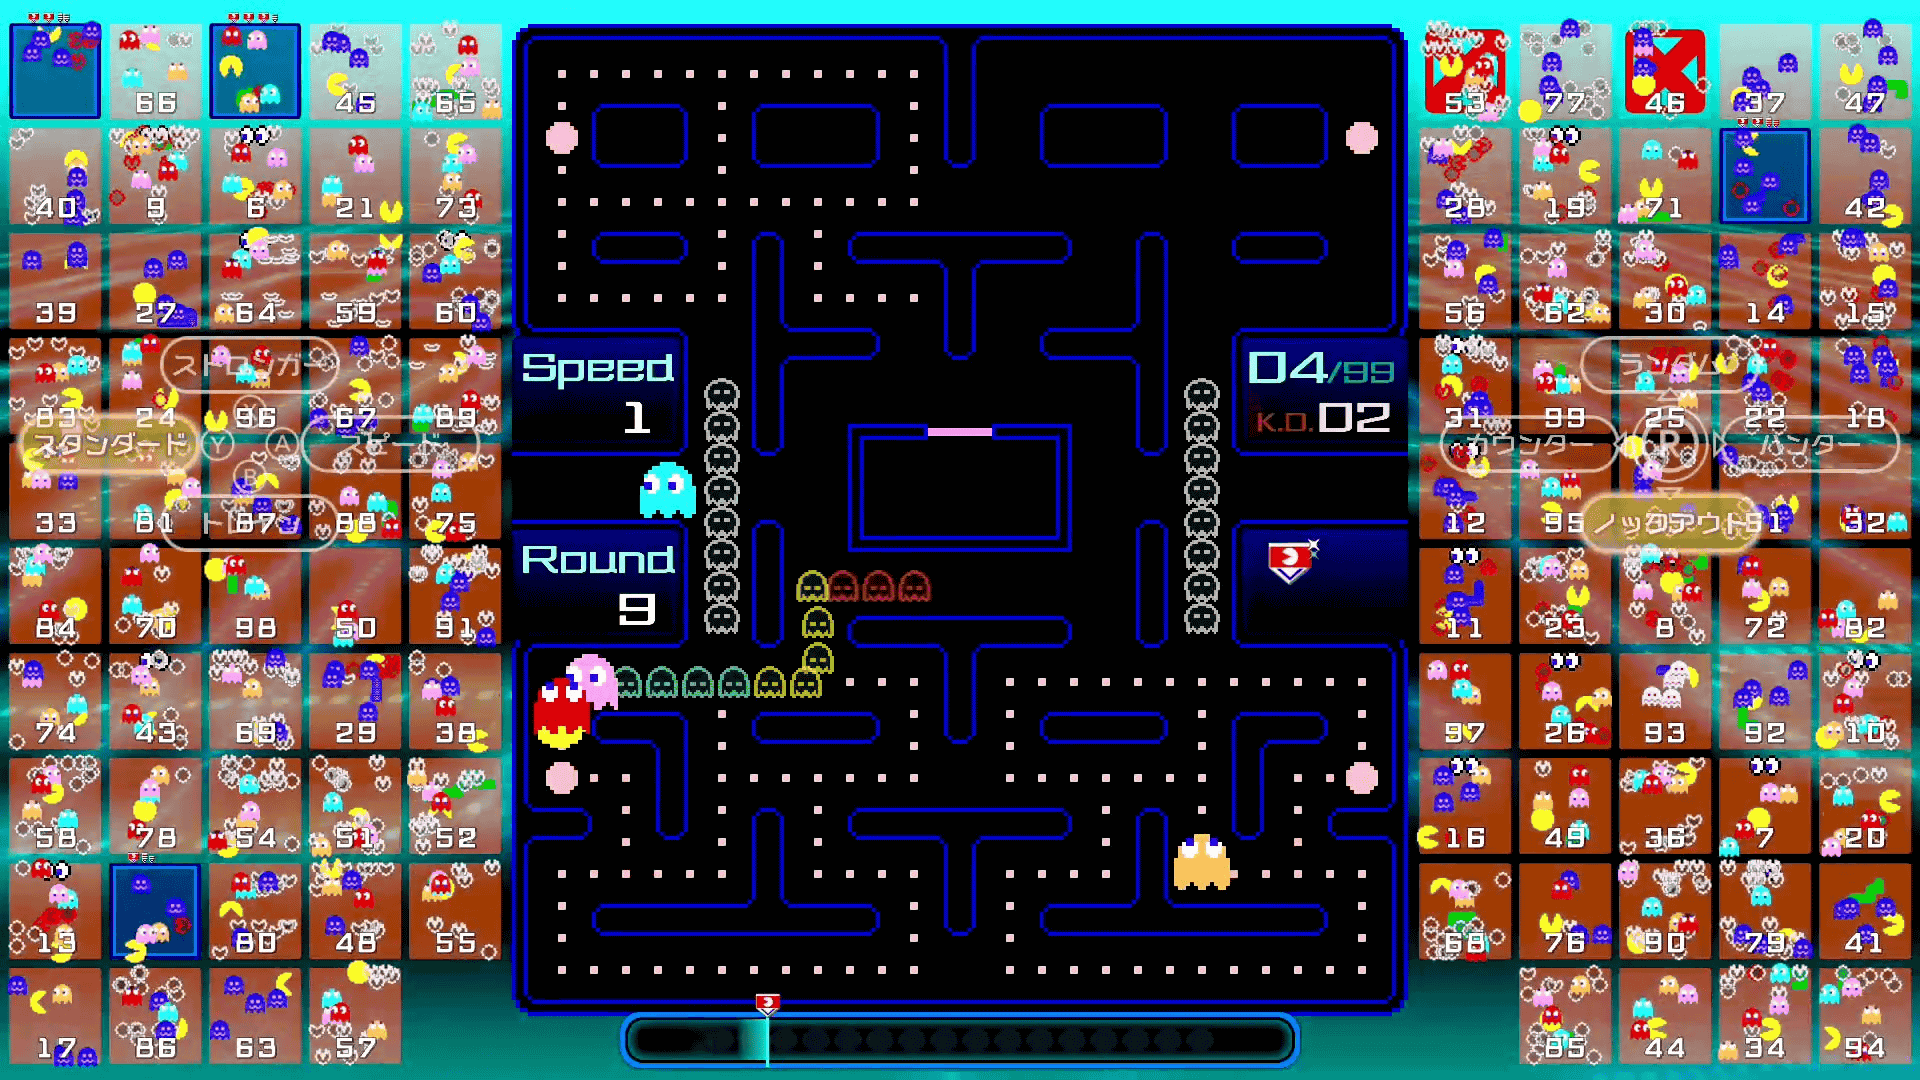 I tried playing the 99-player battle royale 'PAC-MAN 99' that keeps eating  until Pac-Man is the last one on Nintendo Switch. - GIGAZINE